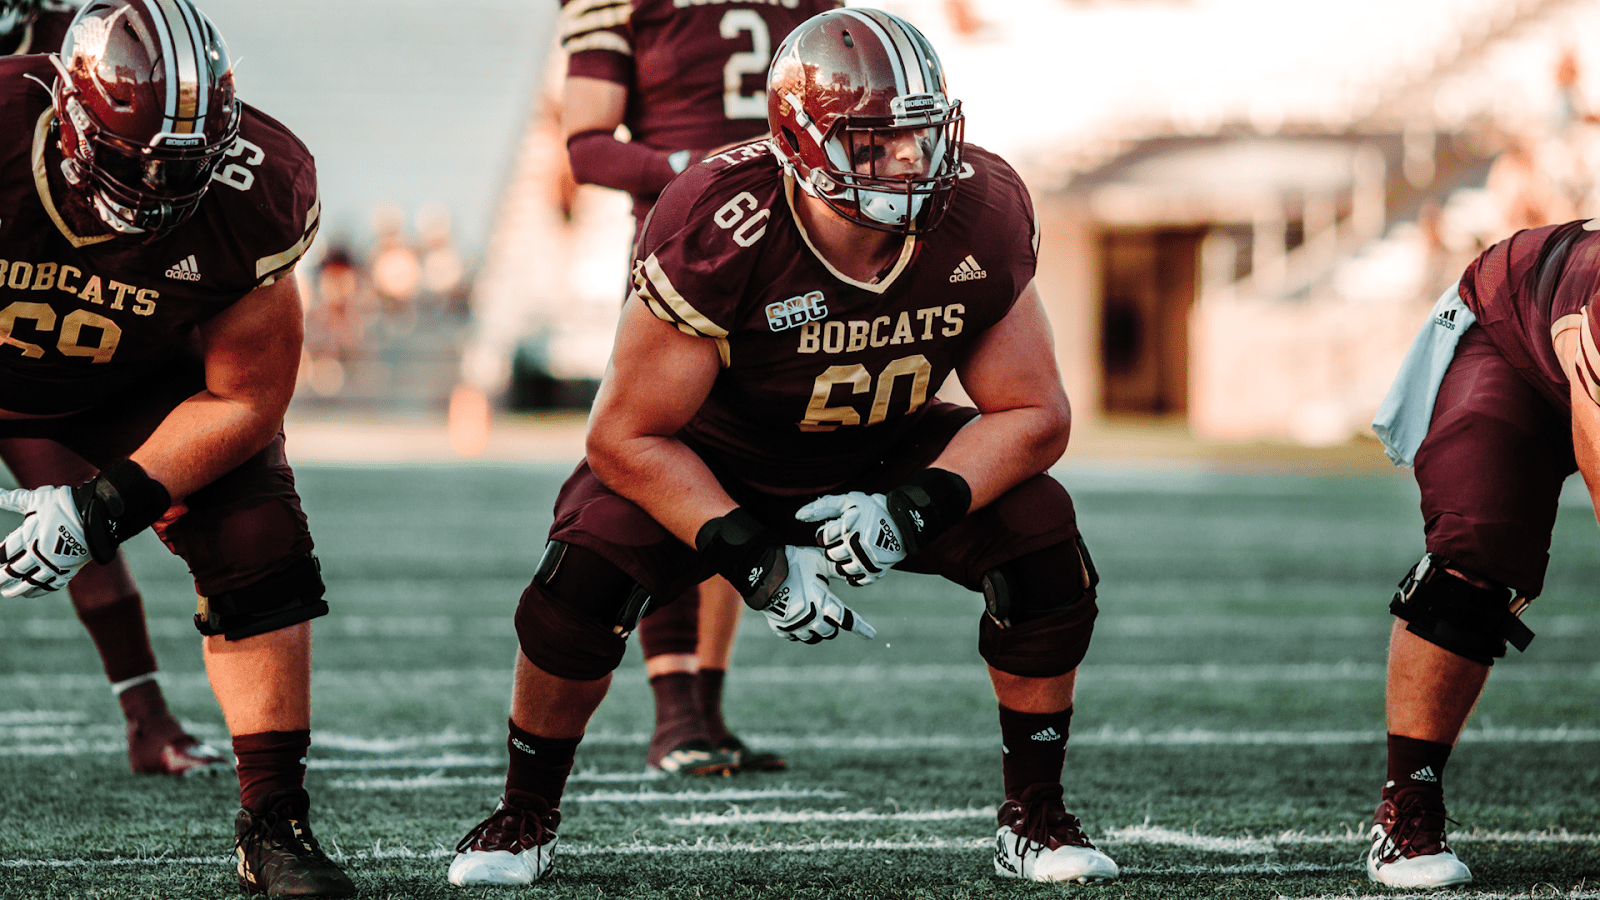 Kyle Hergel is an intelligent athlete and gritty player who recently transferred to Boston College from Texas State. Hula Bowl scout Brandon Harston breaks down Hergel as an NFL Prospect in his report.